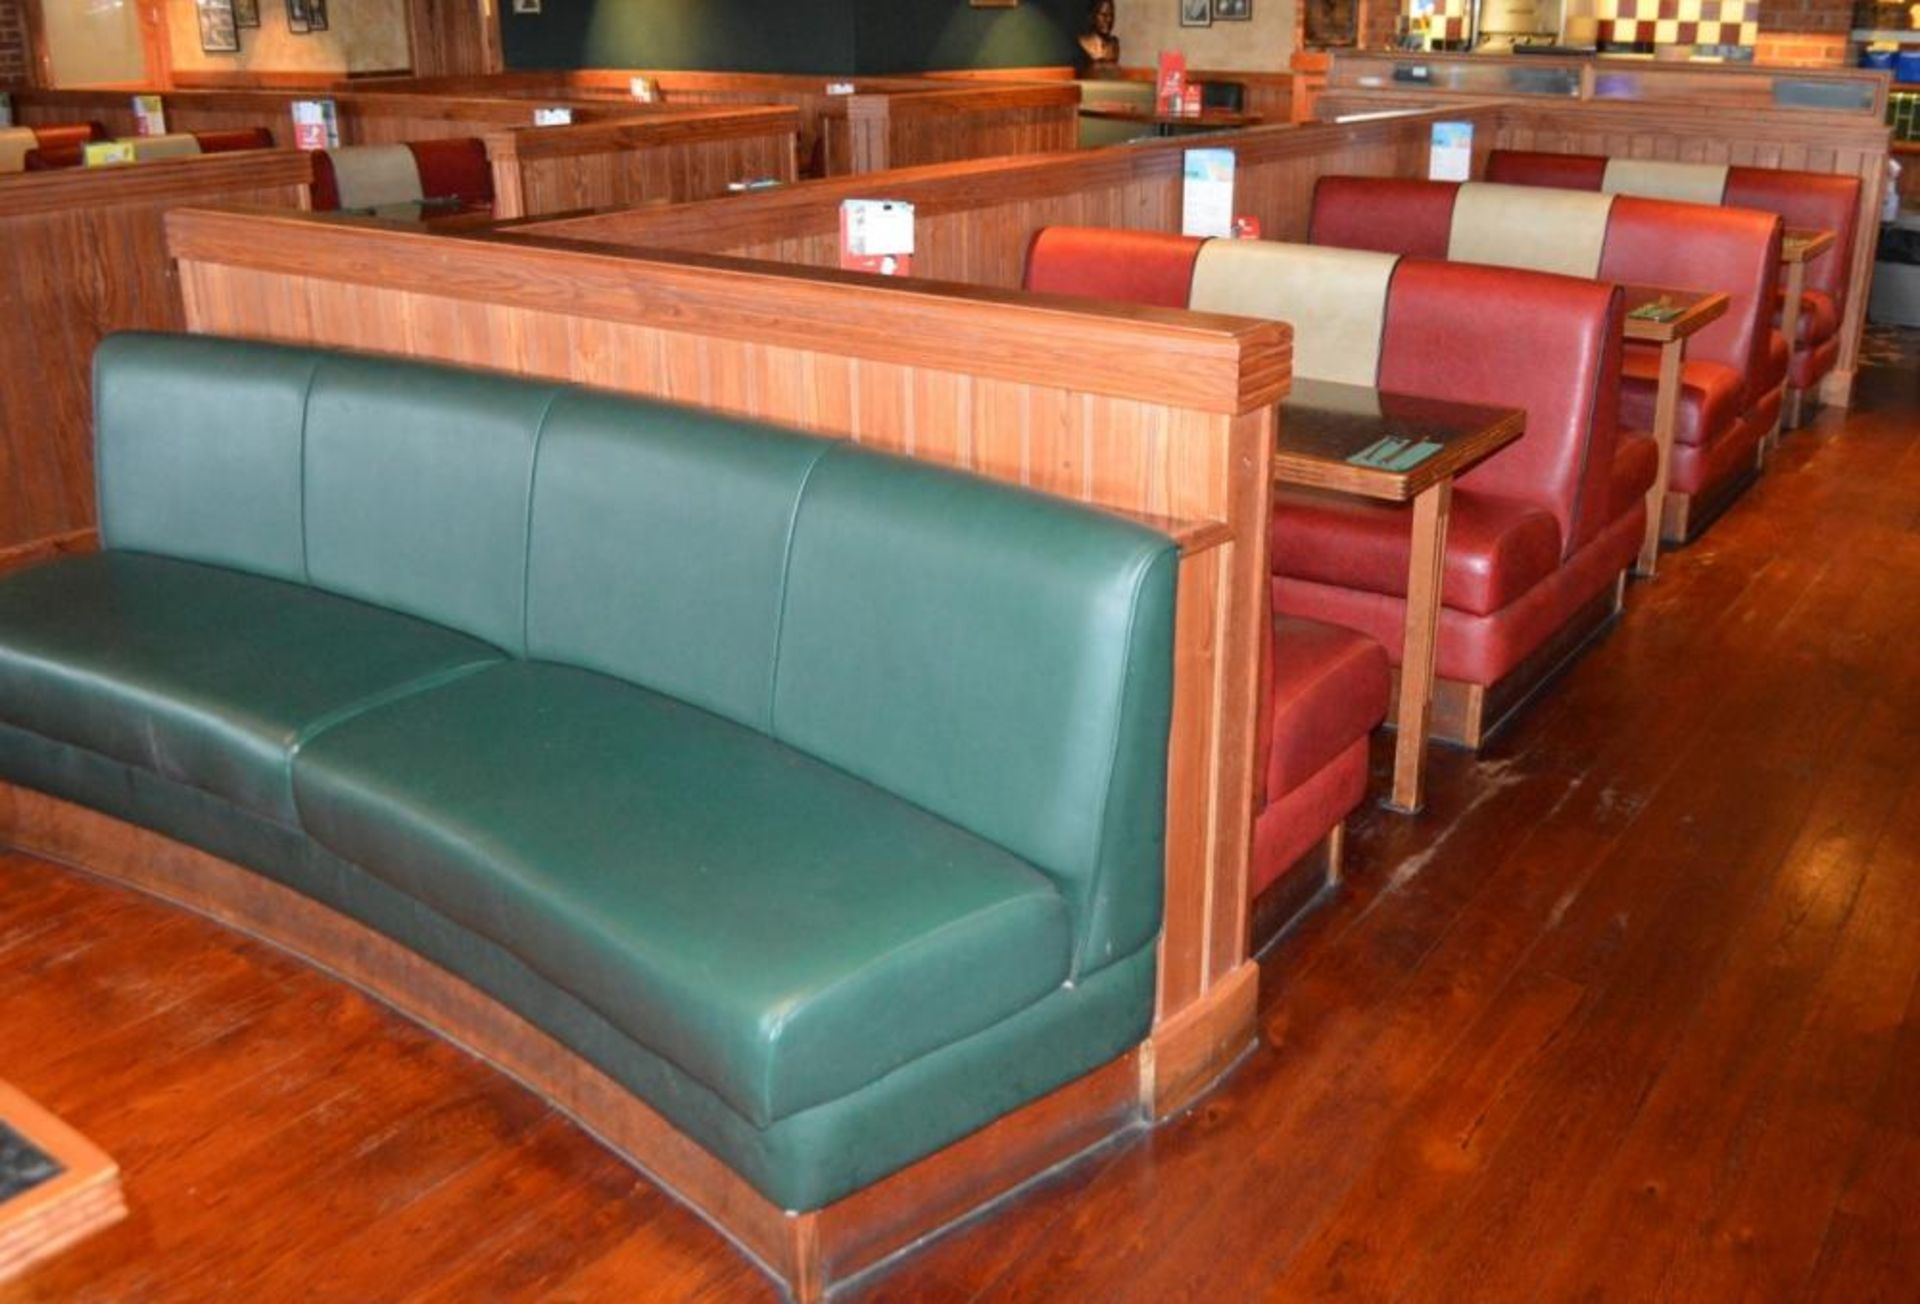 1 x Selection of Cosy Bespoke Seating Booths in a 1950's Retro American Diner Design With Dining Tab - Image 21 of 30